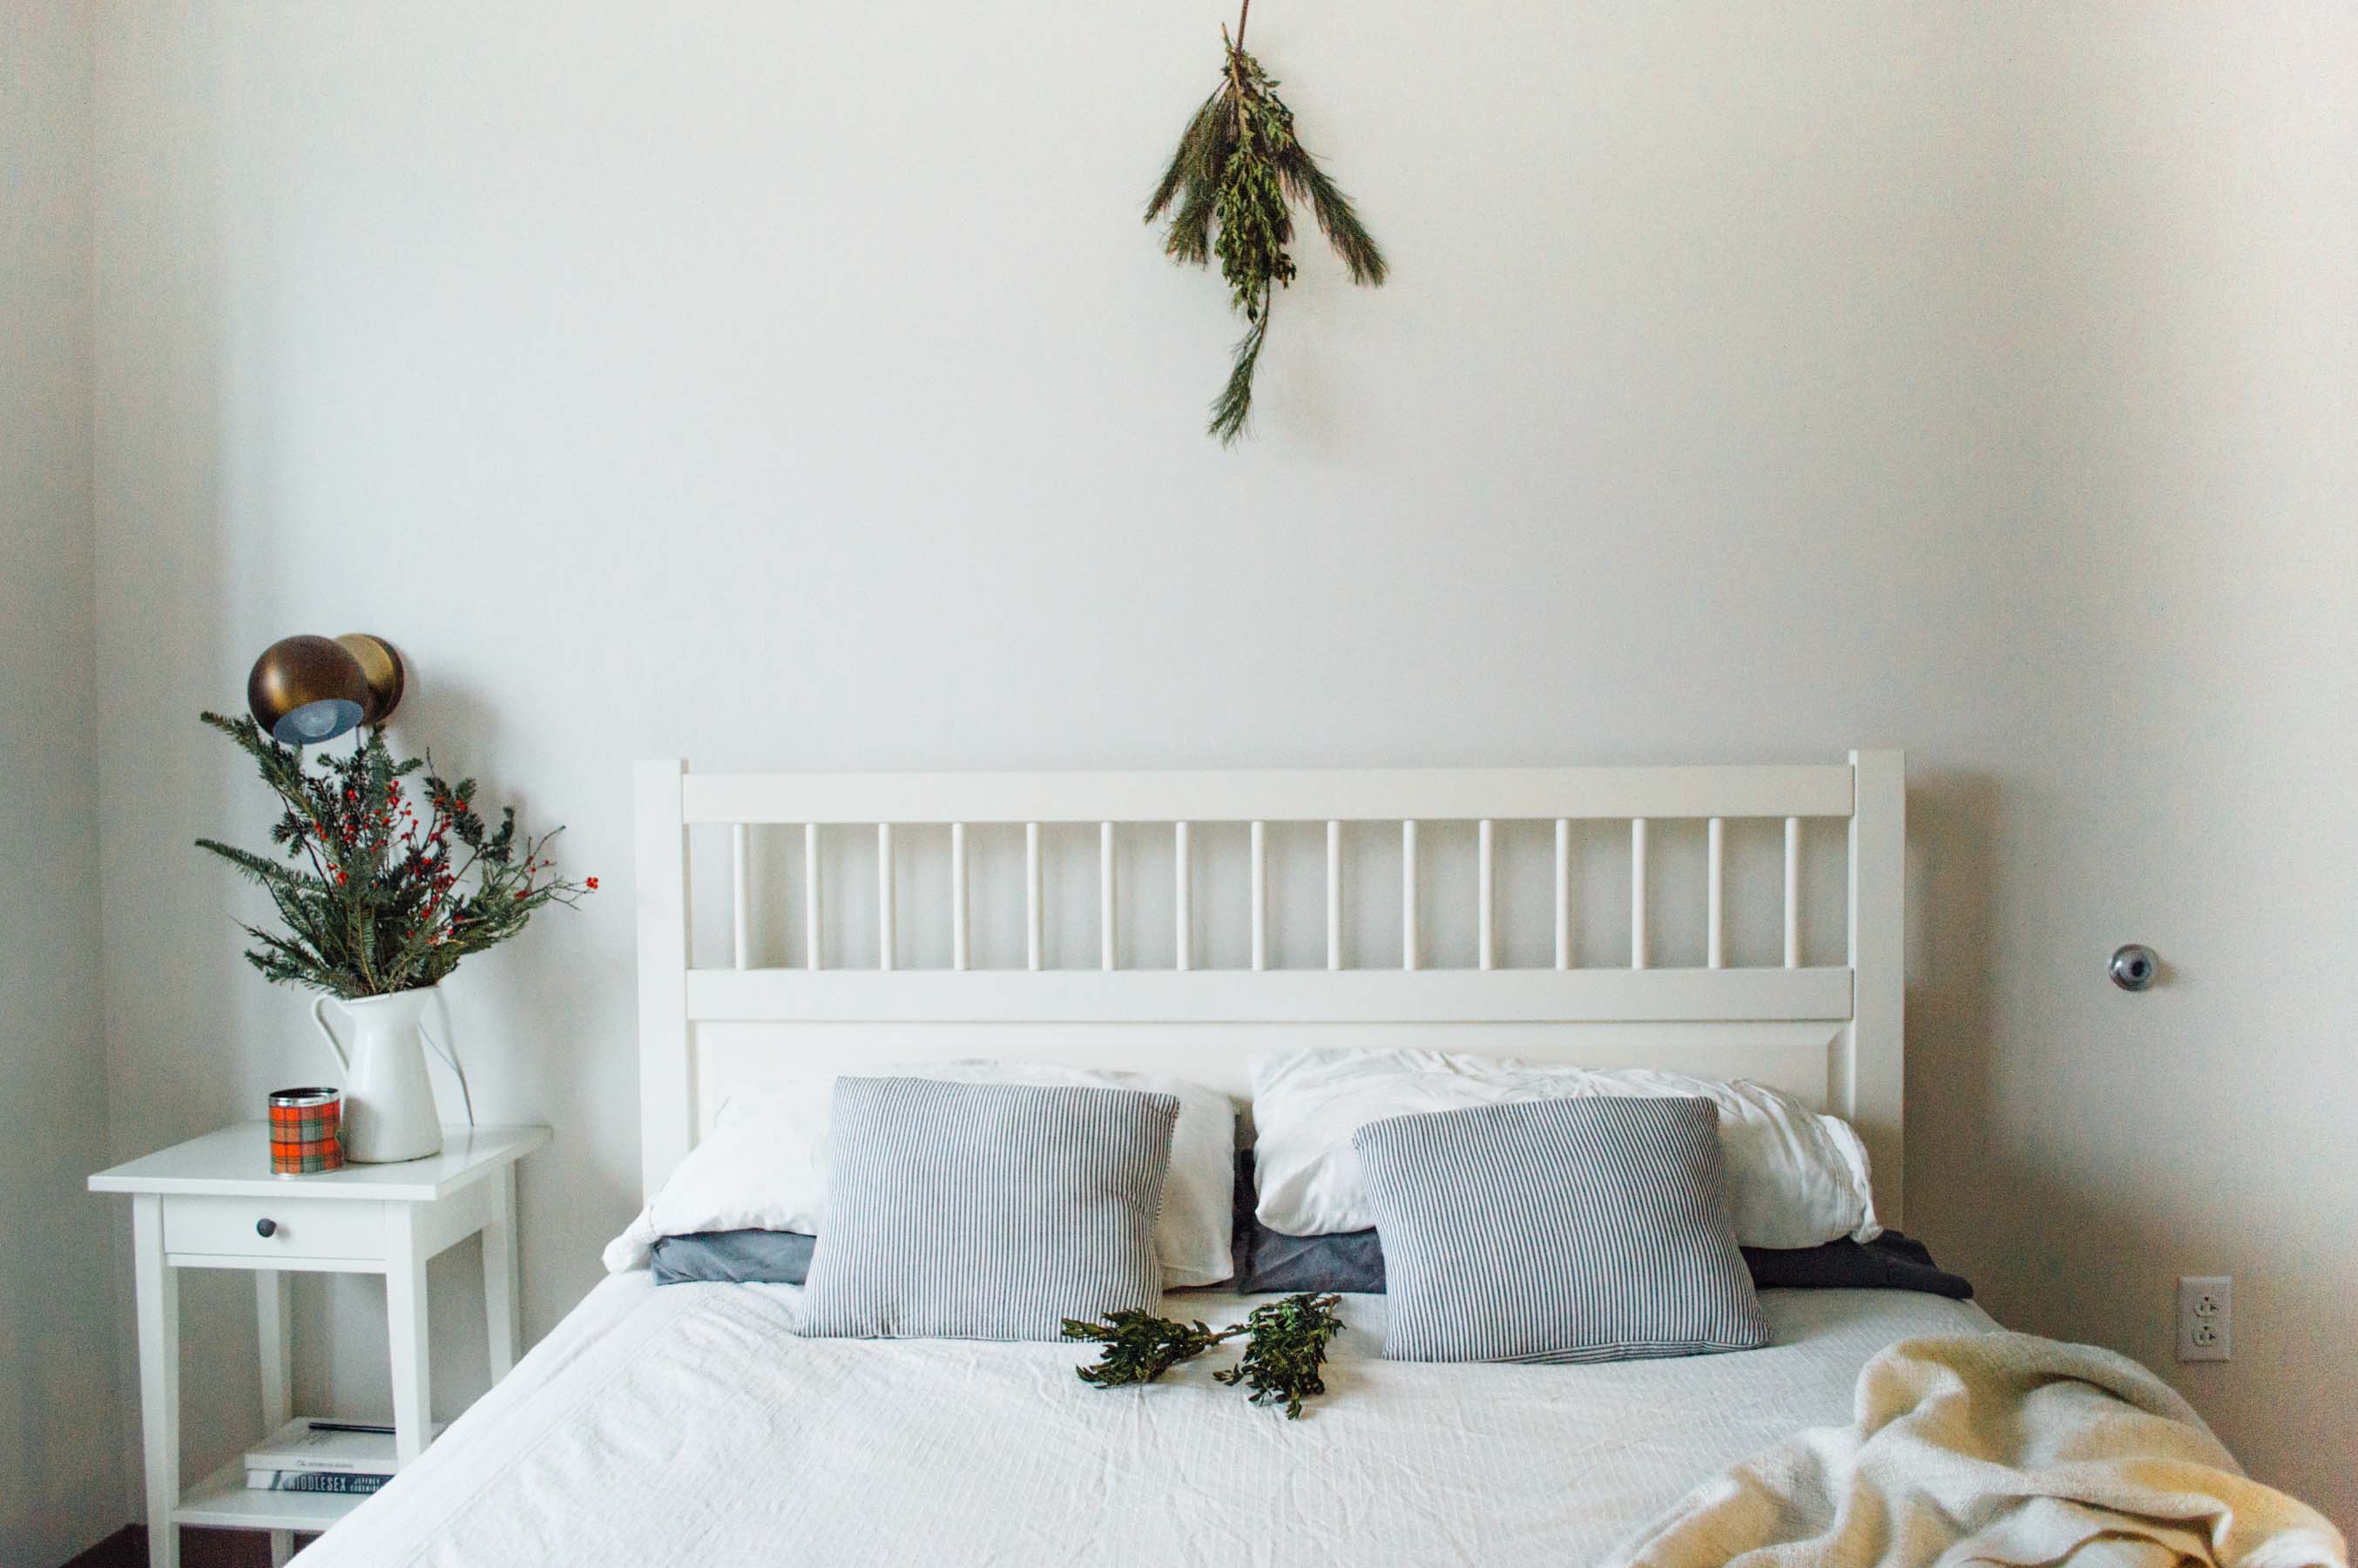 Quick and easy tips on hosting holiday houseguests this season | bygabriella.co